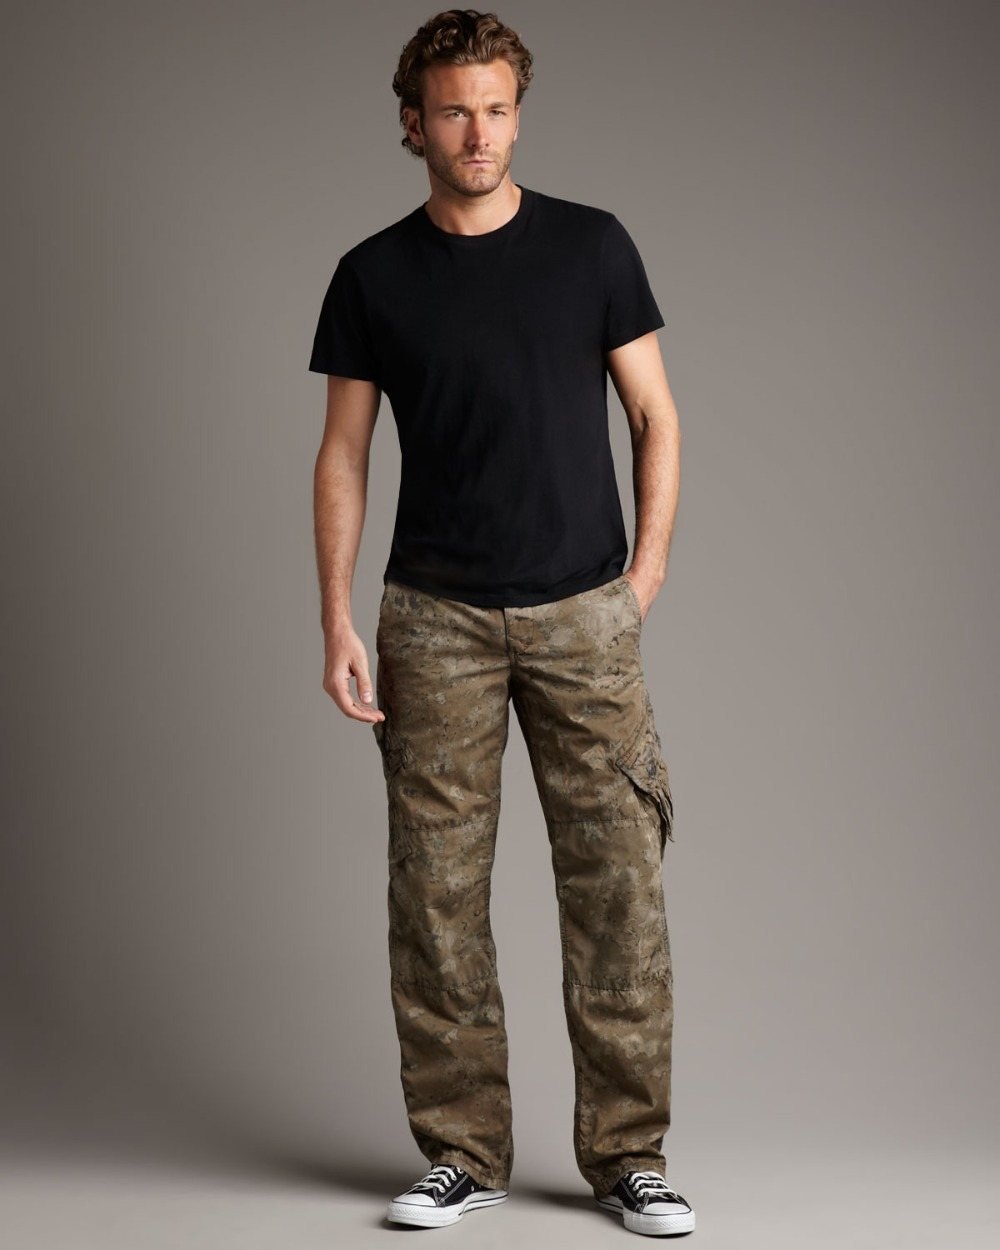 retro cargo hose with black t-shirt and sneakers combine for 80s menswear